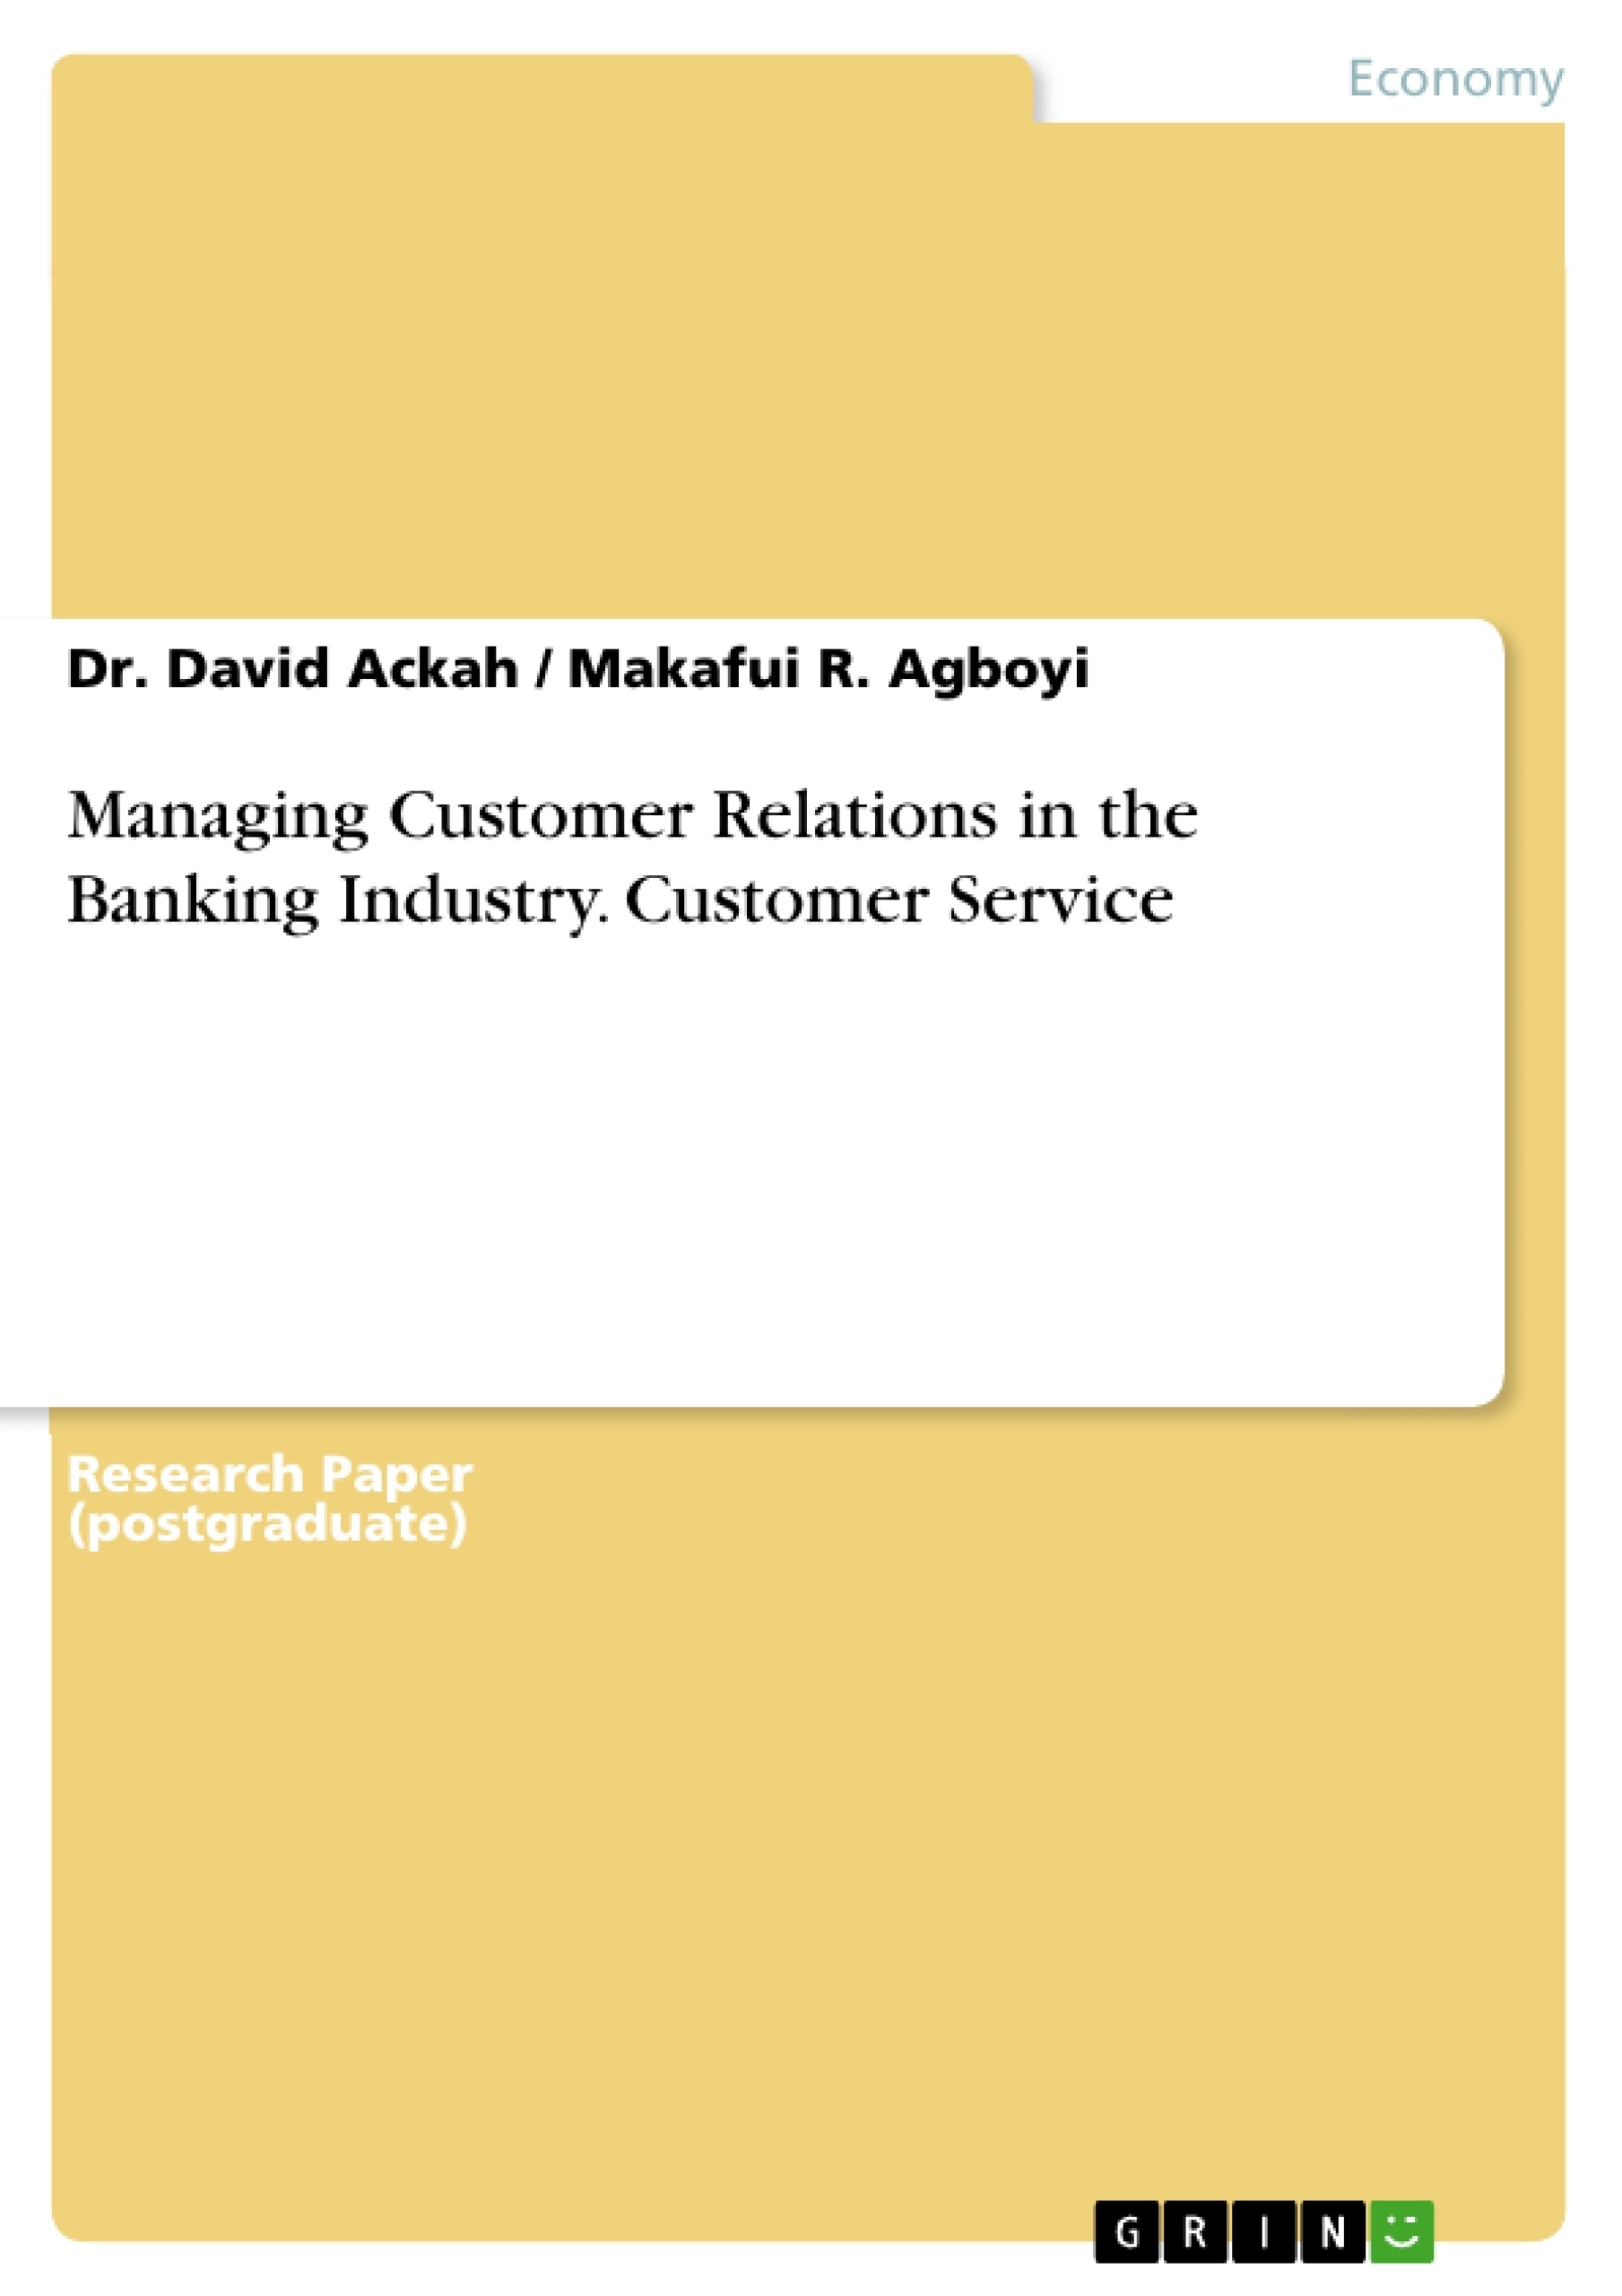 Title: Managing Customer Relations in the Banking Industry. Customer Service